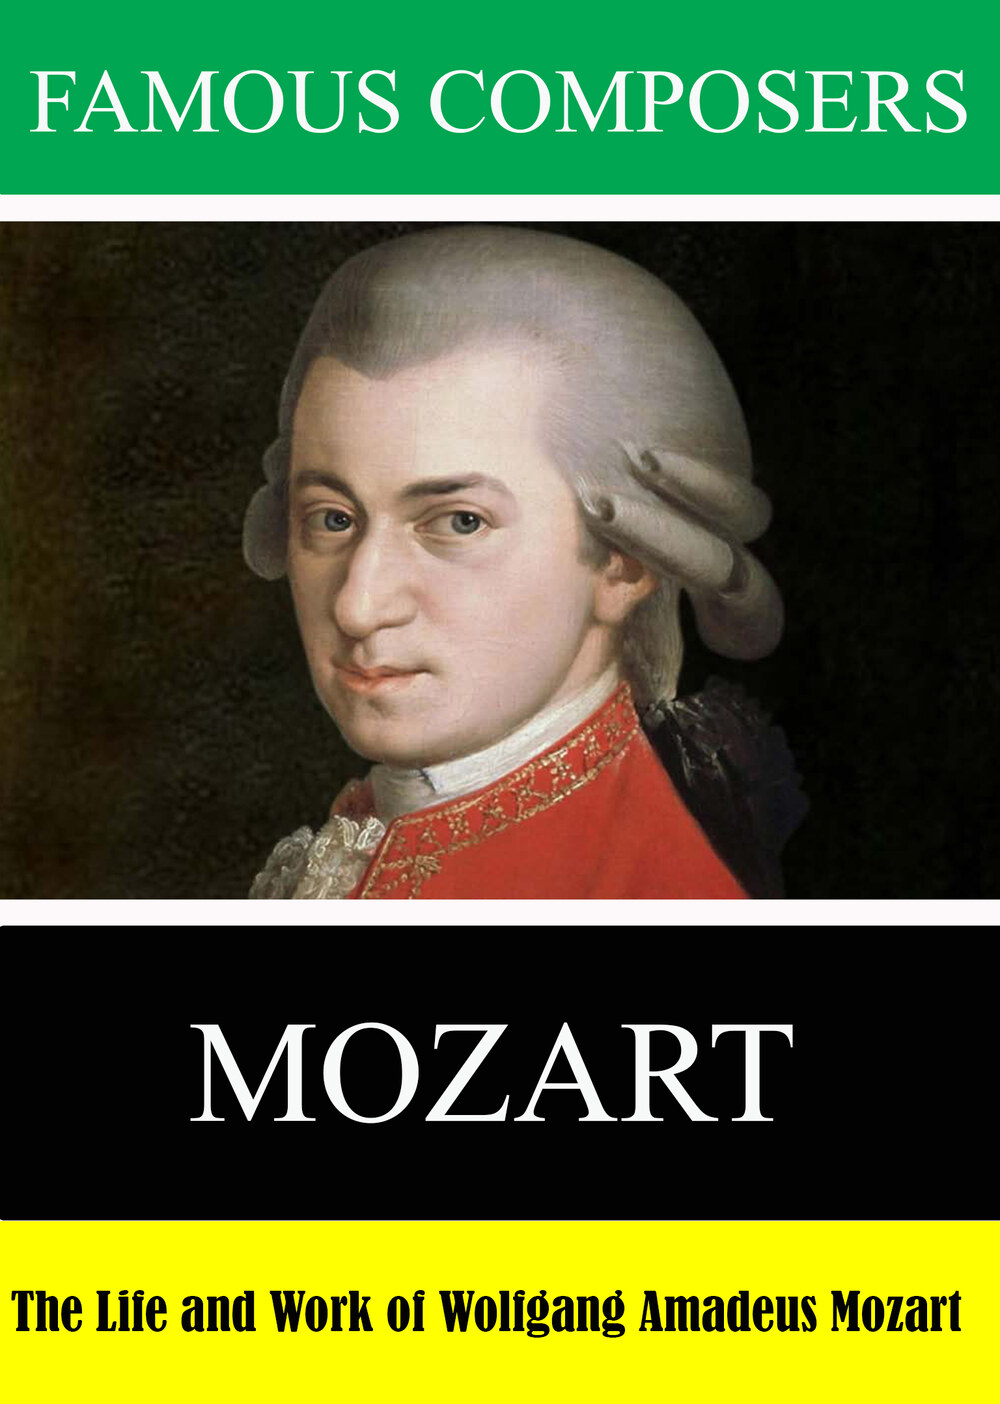 L7924 - Famous Composers: The Life and Work of  Wolfgang Amadeus Mozart